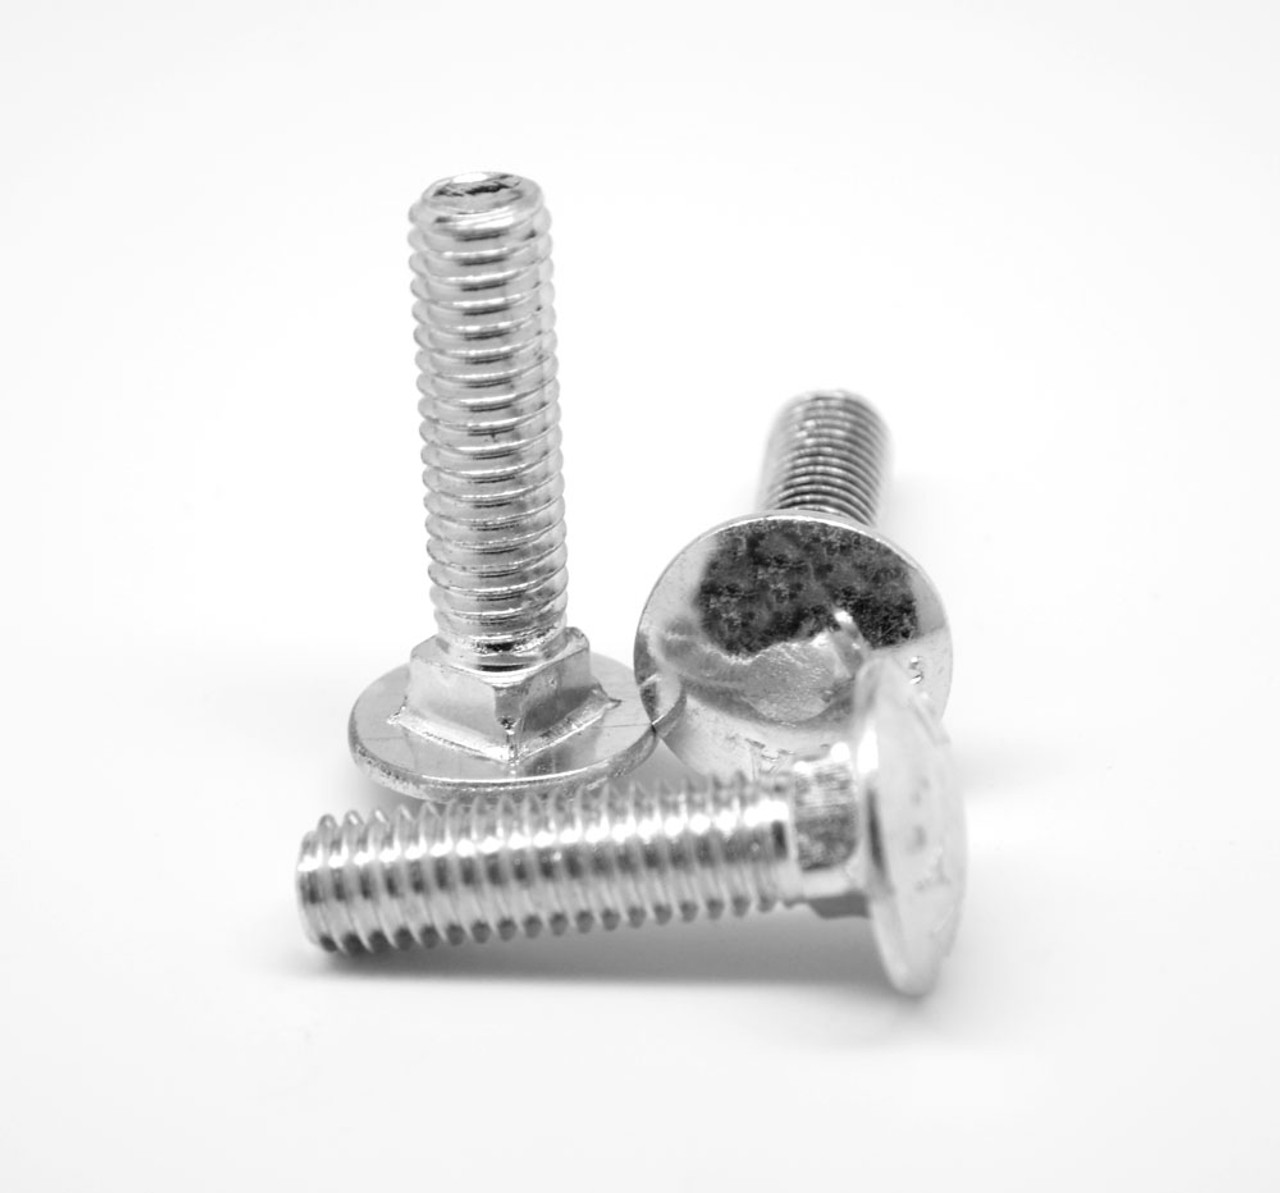 M6 x 1.00 x 25 MM (FT) Coarse Thread DIN 603 Class 4.6 Carriage Bolt Low Carbon Steel Zinc Plated